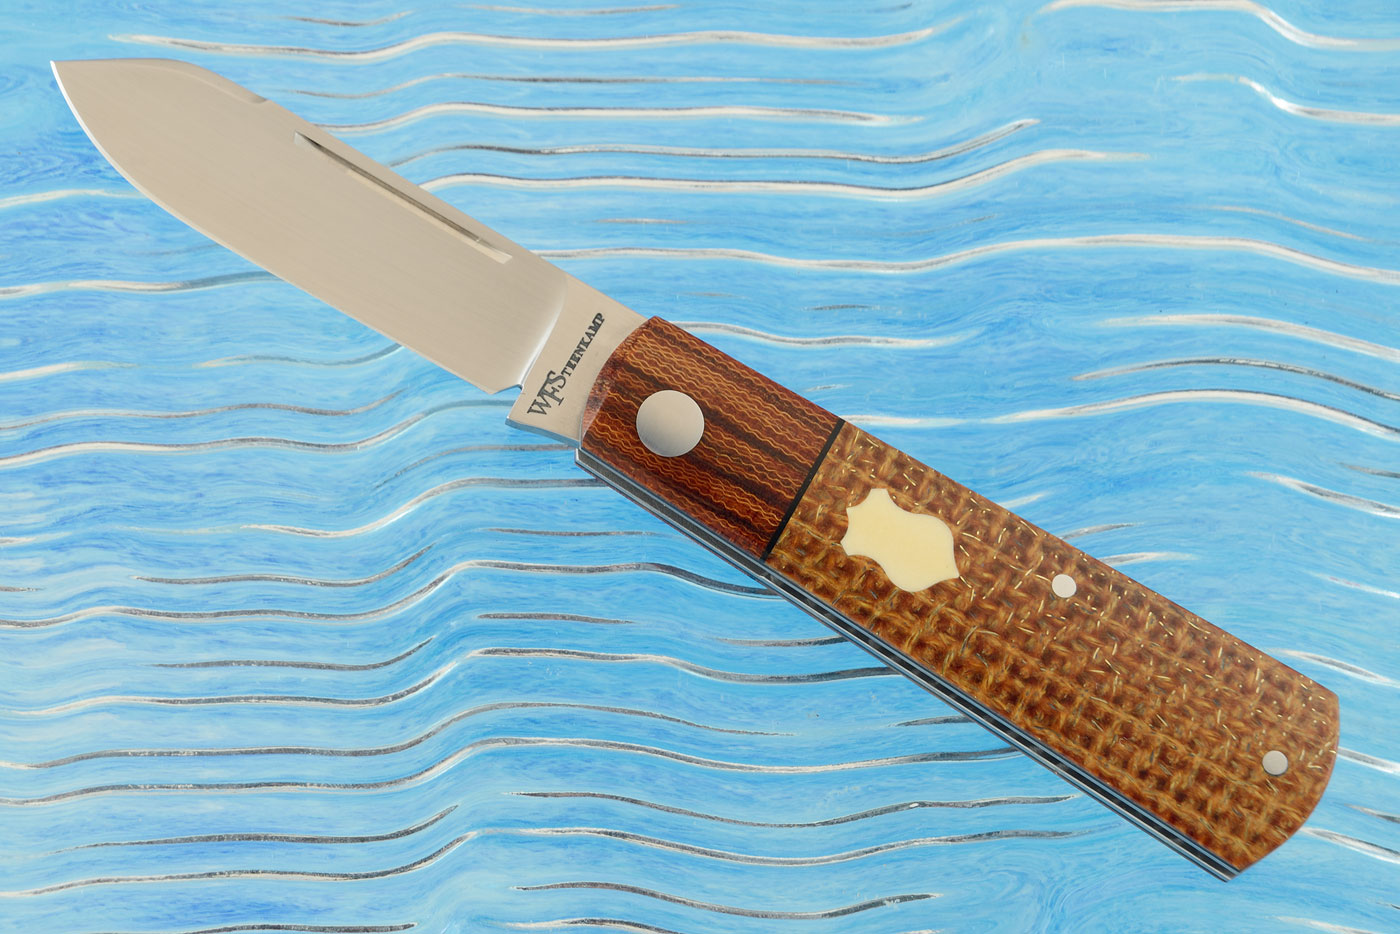 Barlow Slipjoint with Thunderstorm Kevlar, Natural Micarta, and Antique Westinghouse Micarta